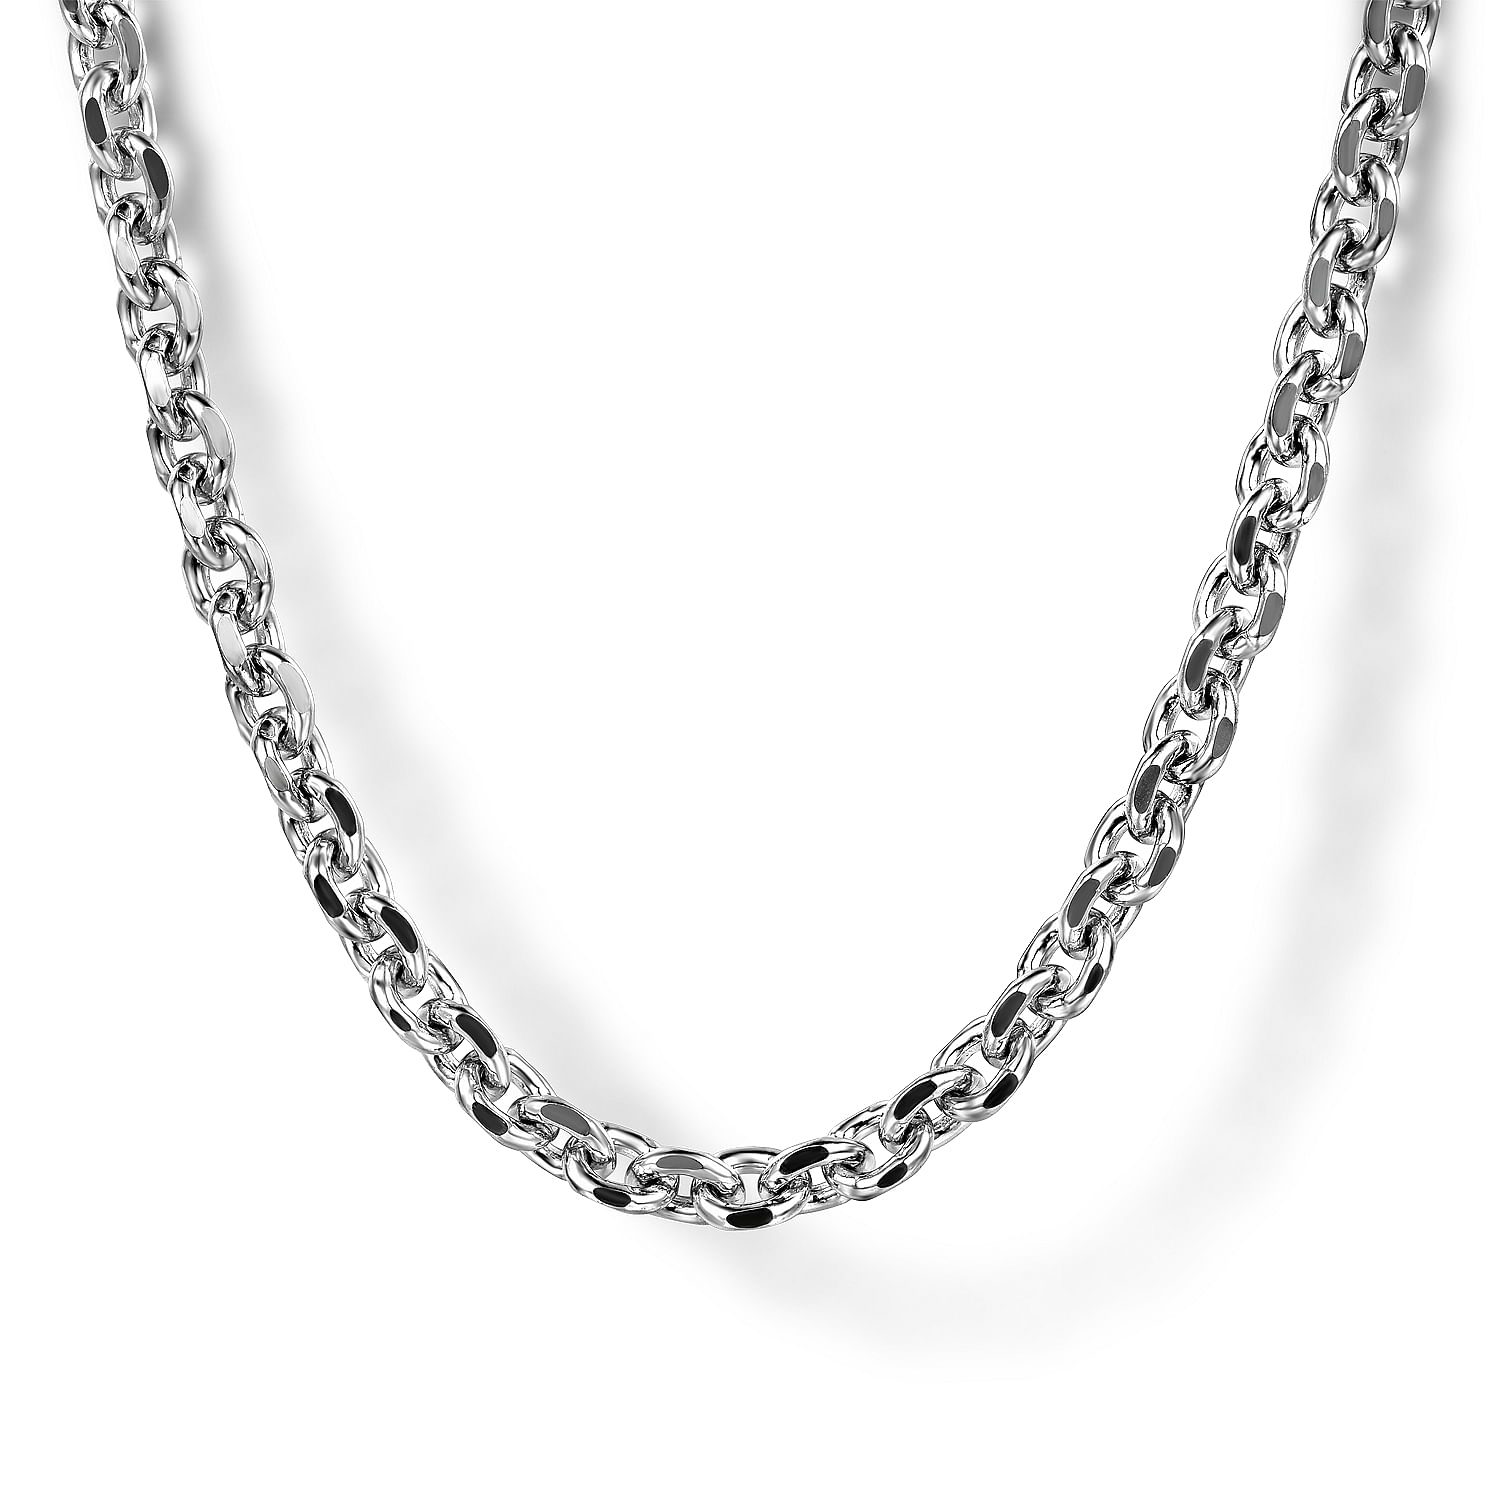 24 Inch 925 Sterling Silver Solid Men's Link Chain Necklace 